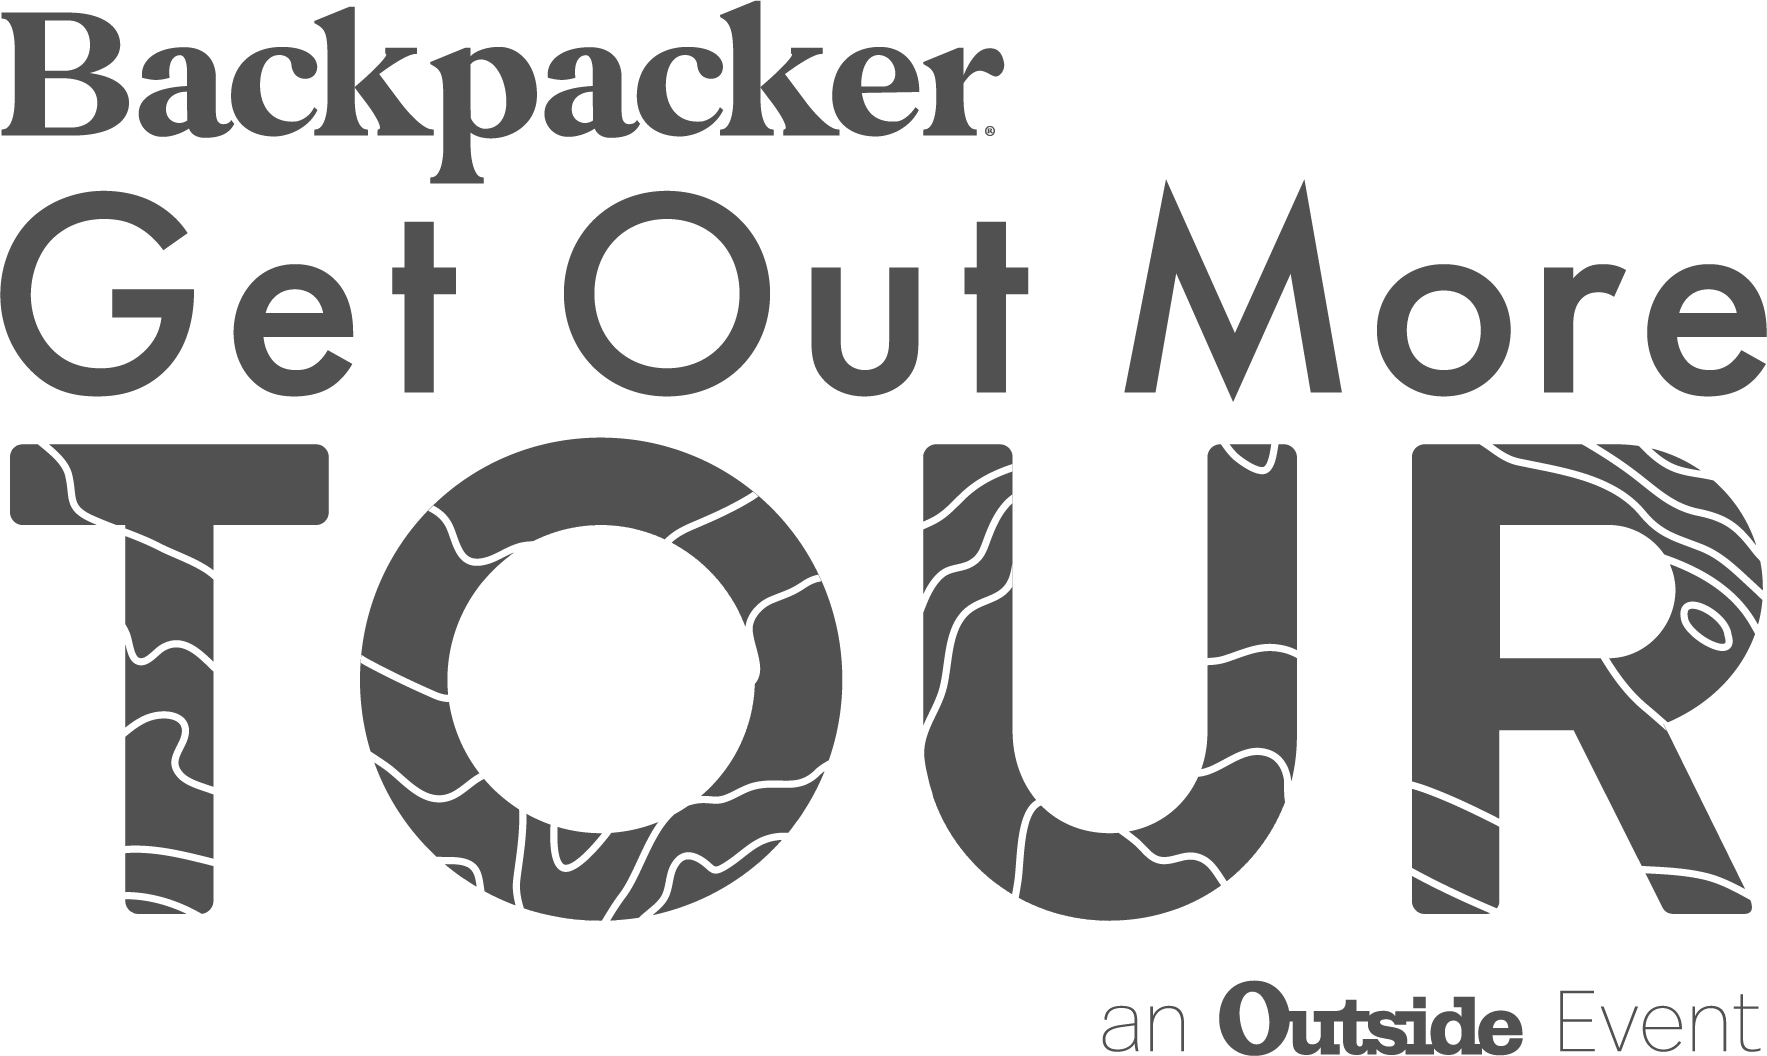 Backpacker Magazine - Get Out More Tour